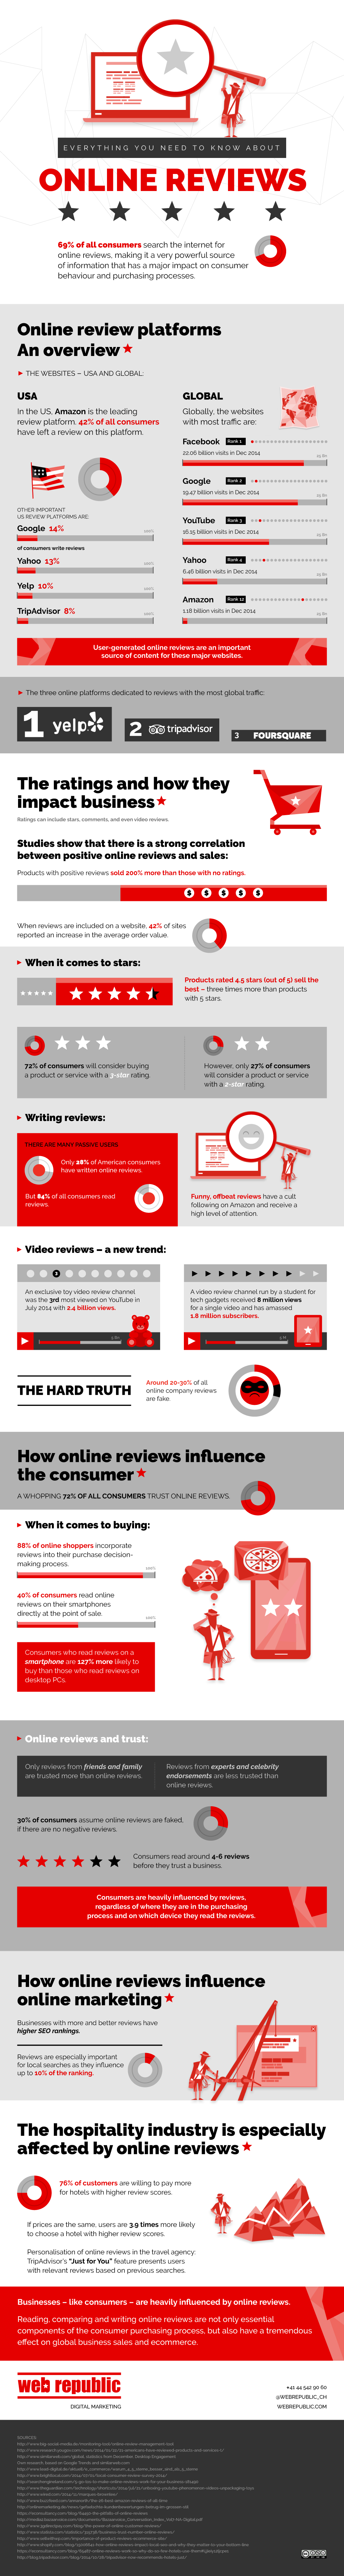 Infographic online reviews